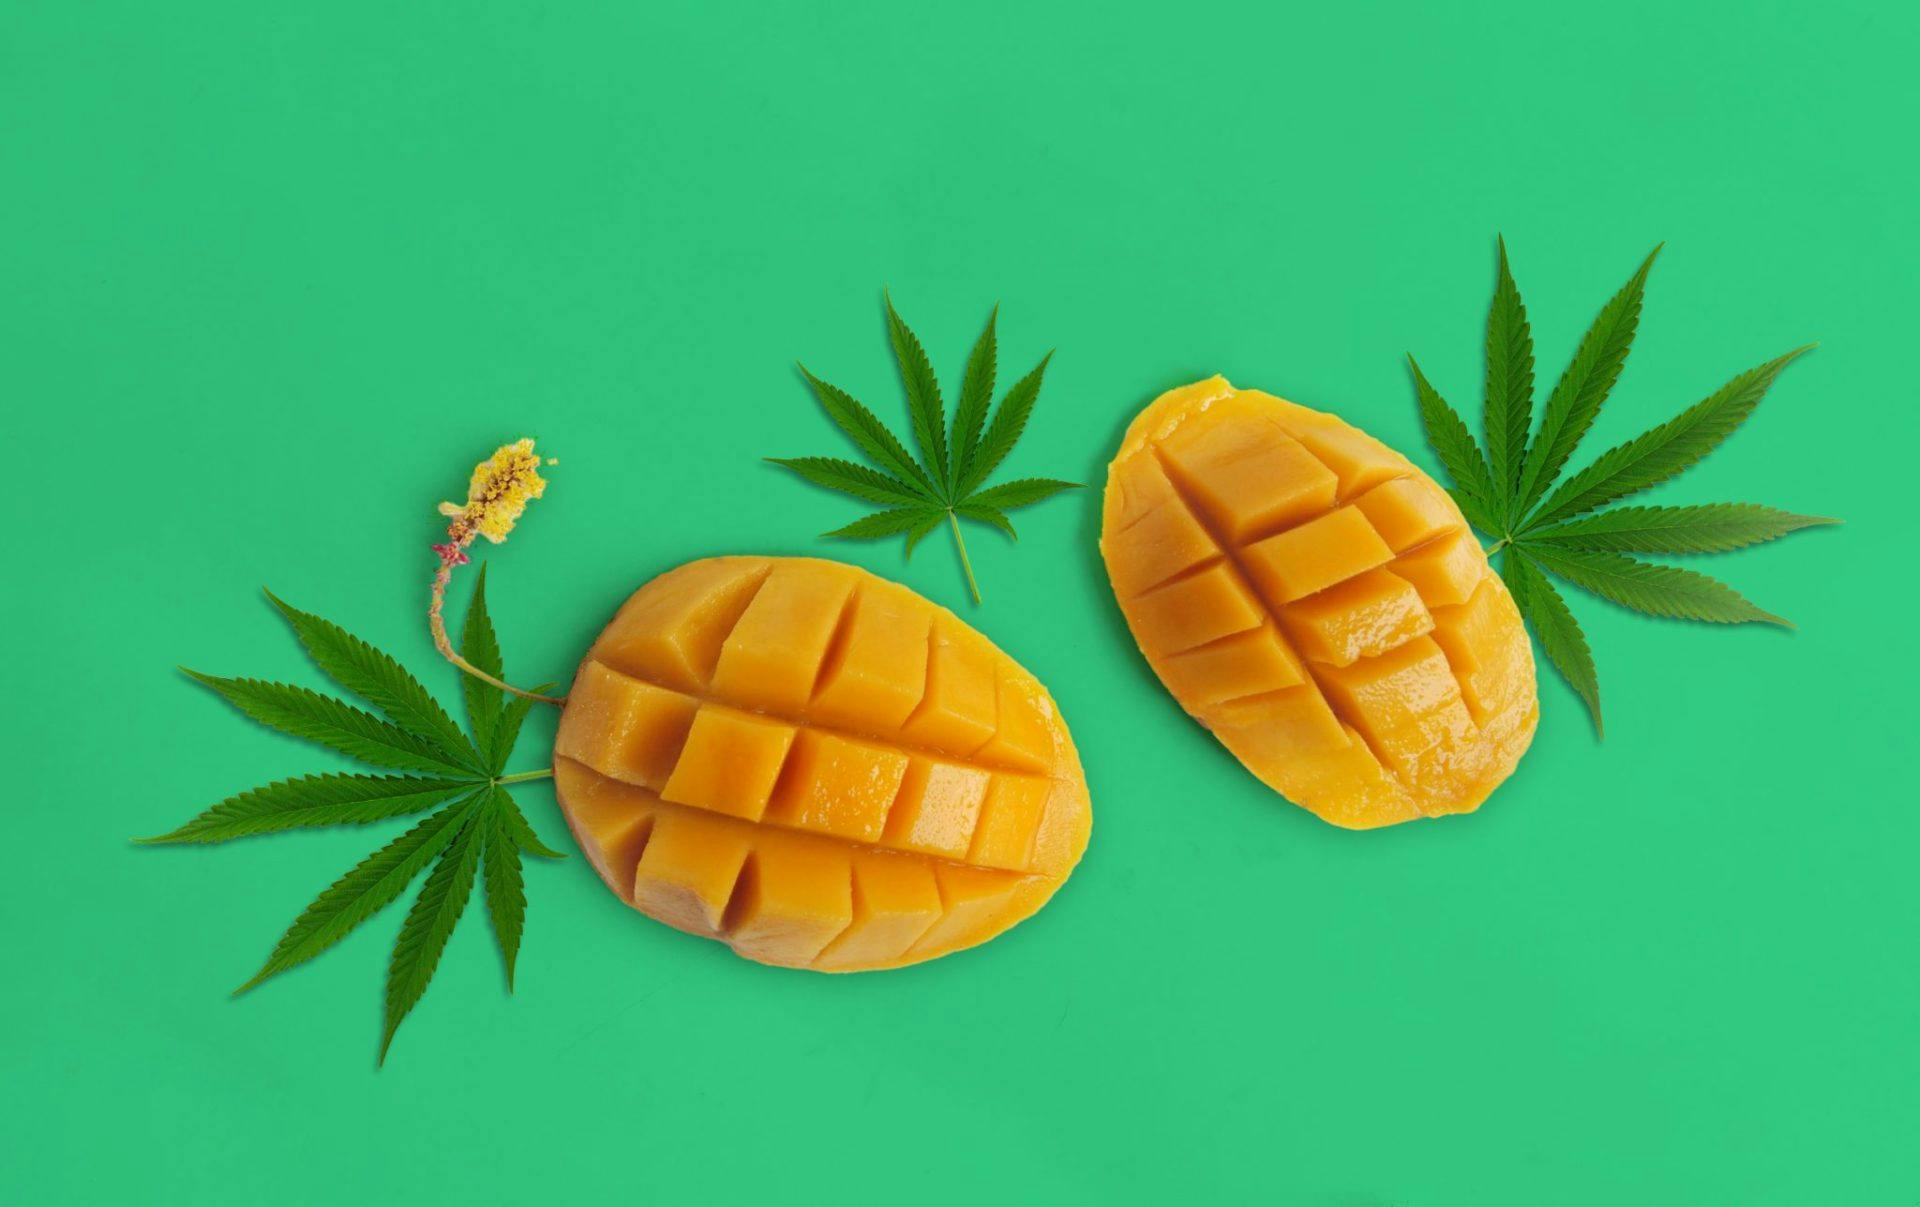 mango sliced into halves and crosswise cuts in the flesh next to cannabis leaves on green background